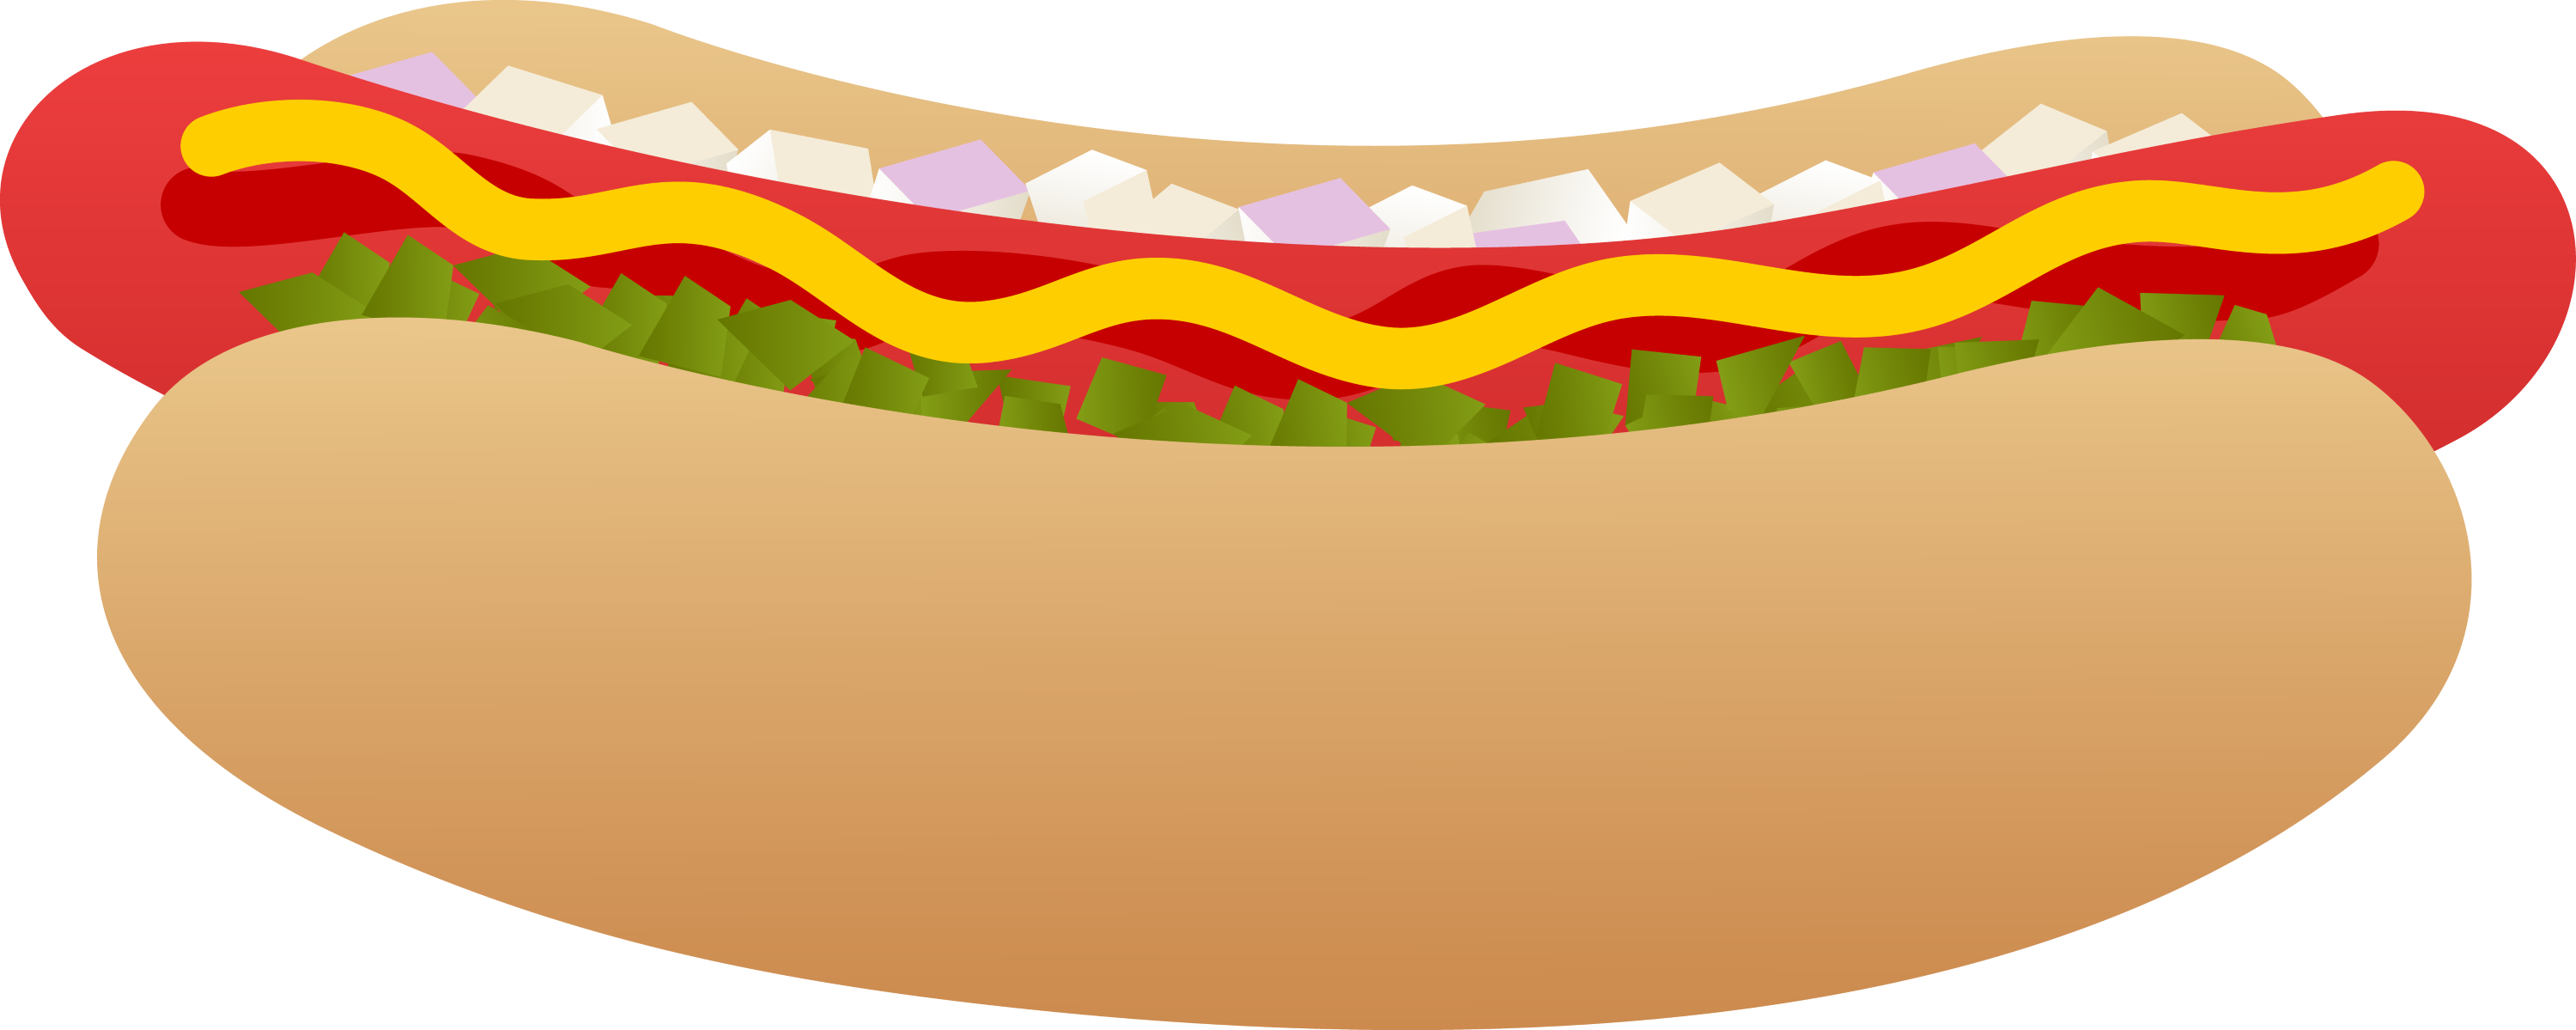 free clipart hot dogs - photo #11